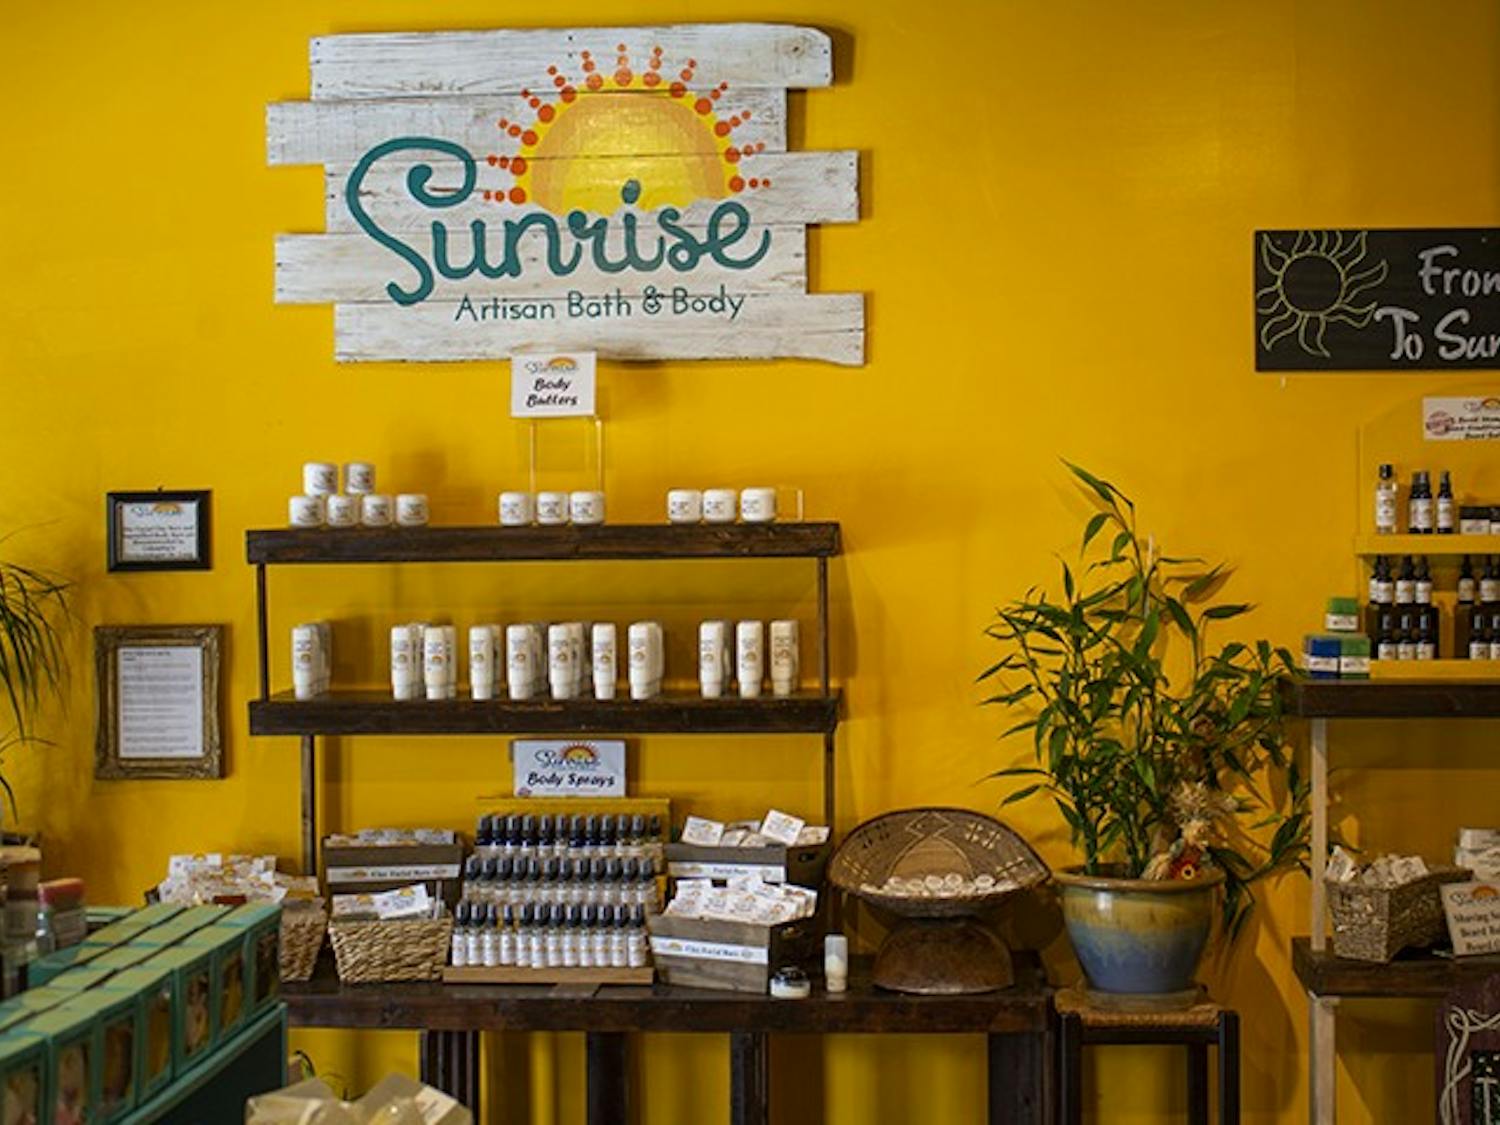 Sunrise Artisan Bath and Body, located in Five Points, has a range of body care items for sale, such as body sprays and body butters, all created by artisan Tzima Brown.